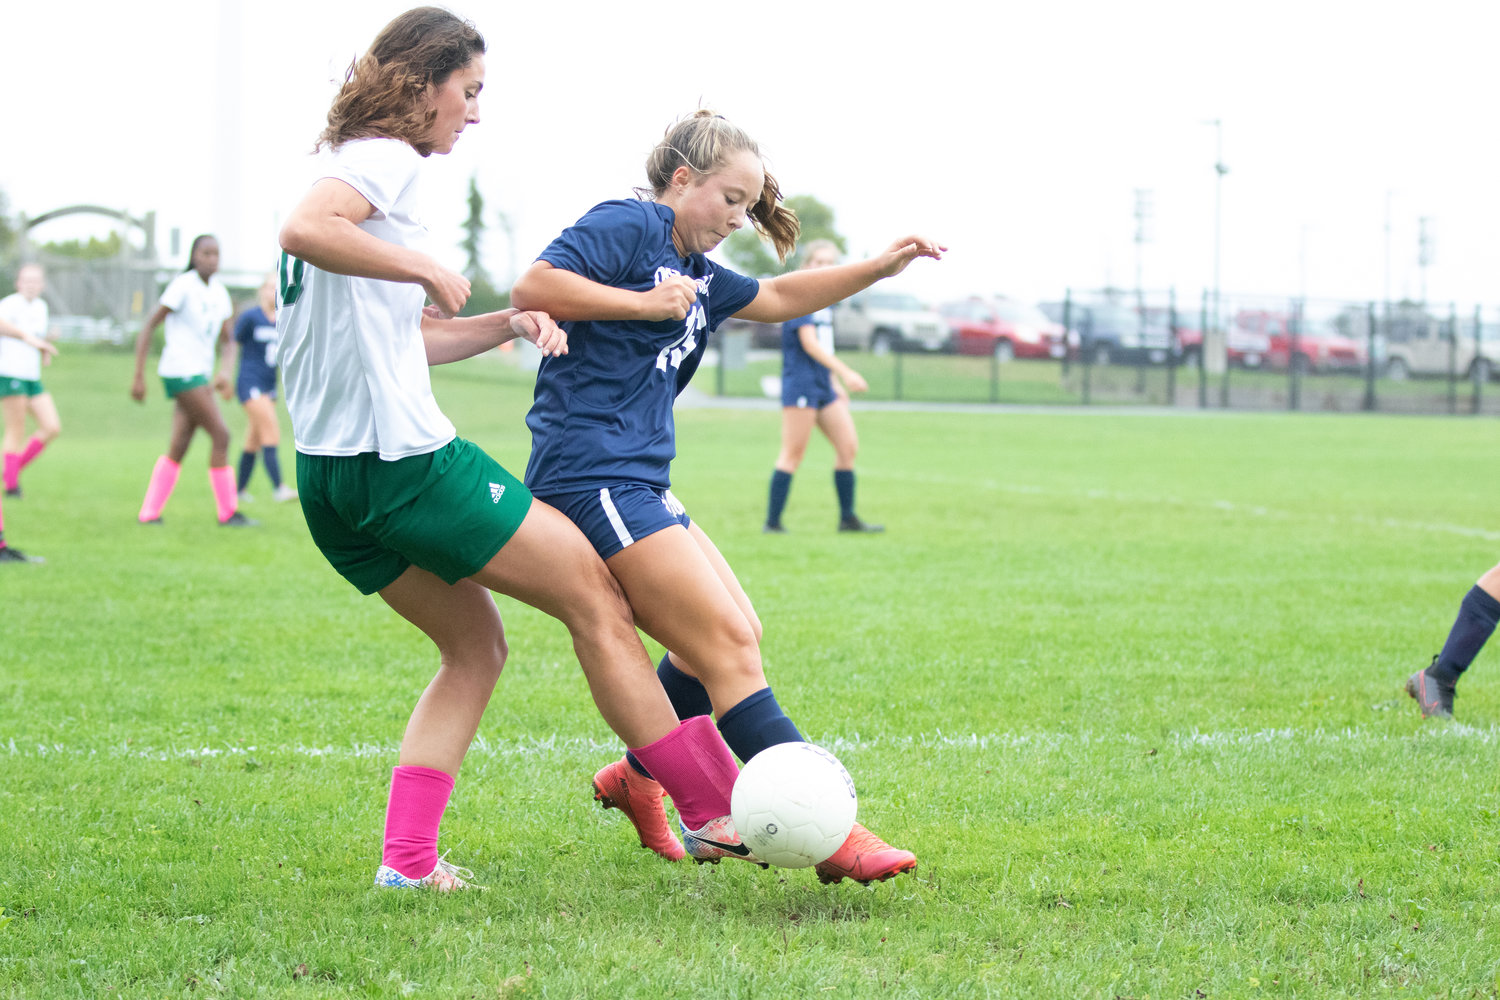 Cydney Mosscrop, right, battles for a loose ball earlier this season against Dennis-Yarmouth. The Whalers lost the first matchup 2-1 but rebounded to win the second meeting 3-1.